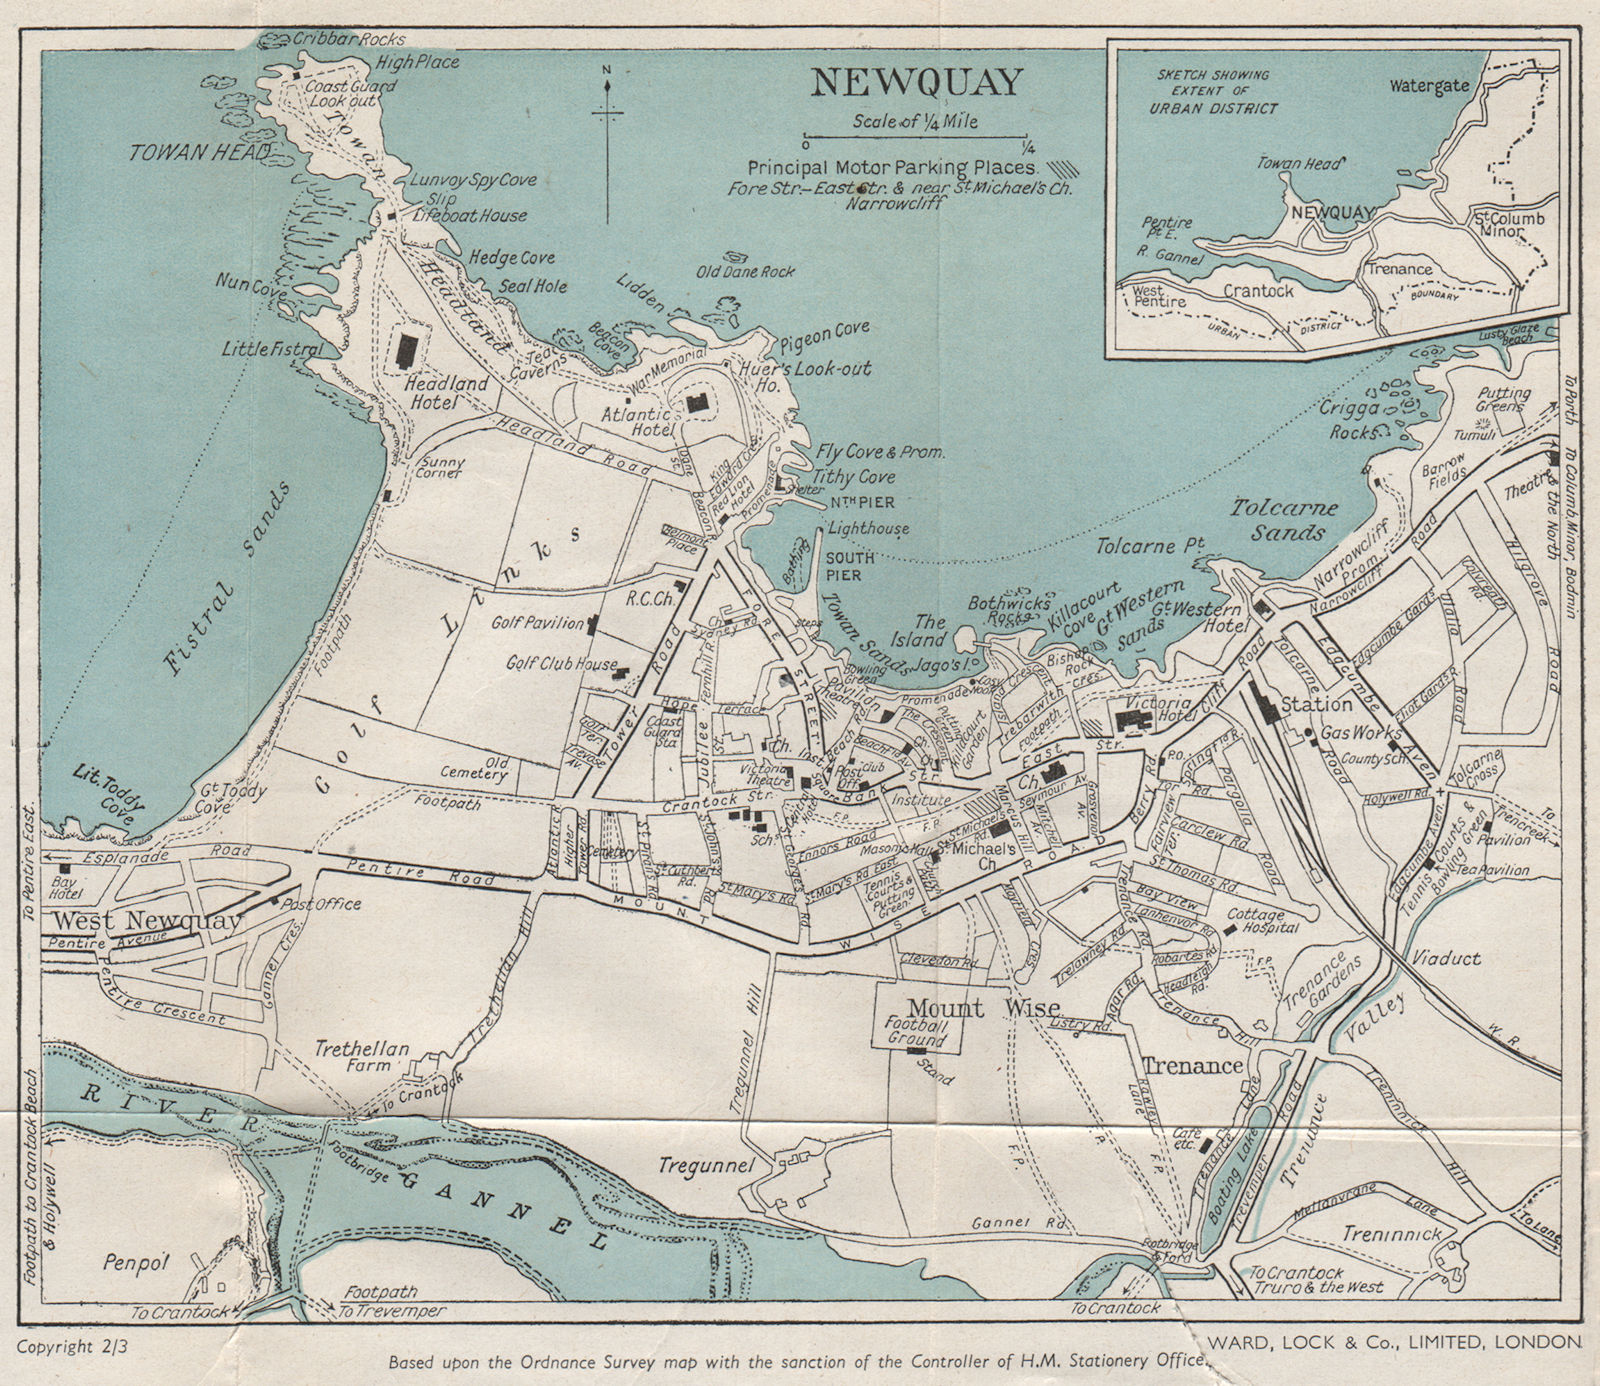 Associate Product NEWQUAY vintage town/city plan. Cornwall. WARD LOCK c1955 old vintage map